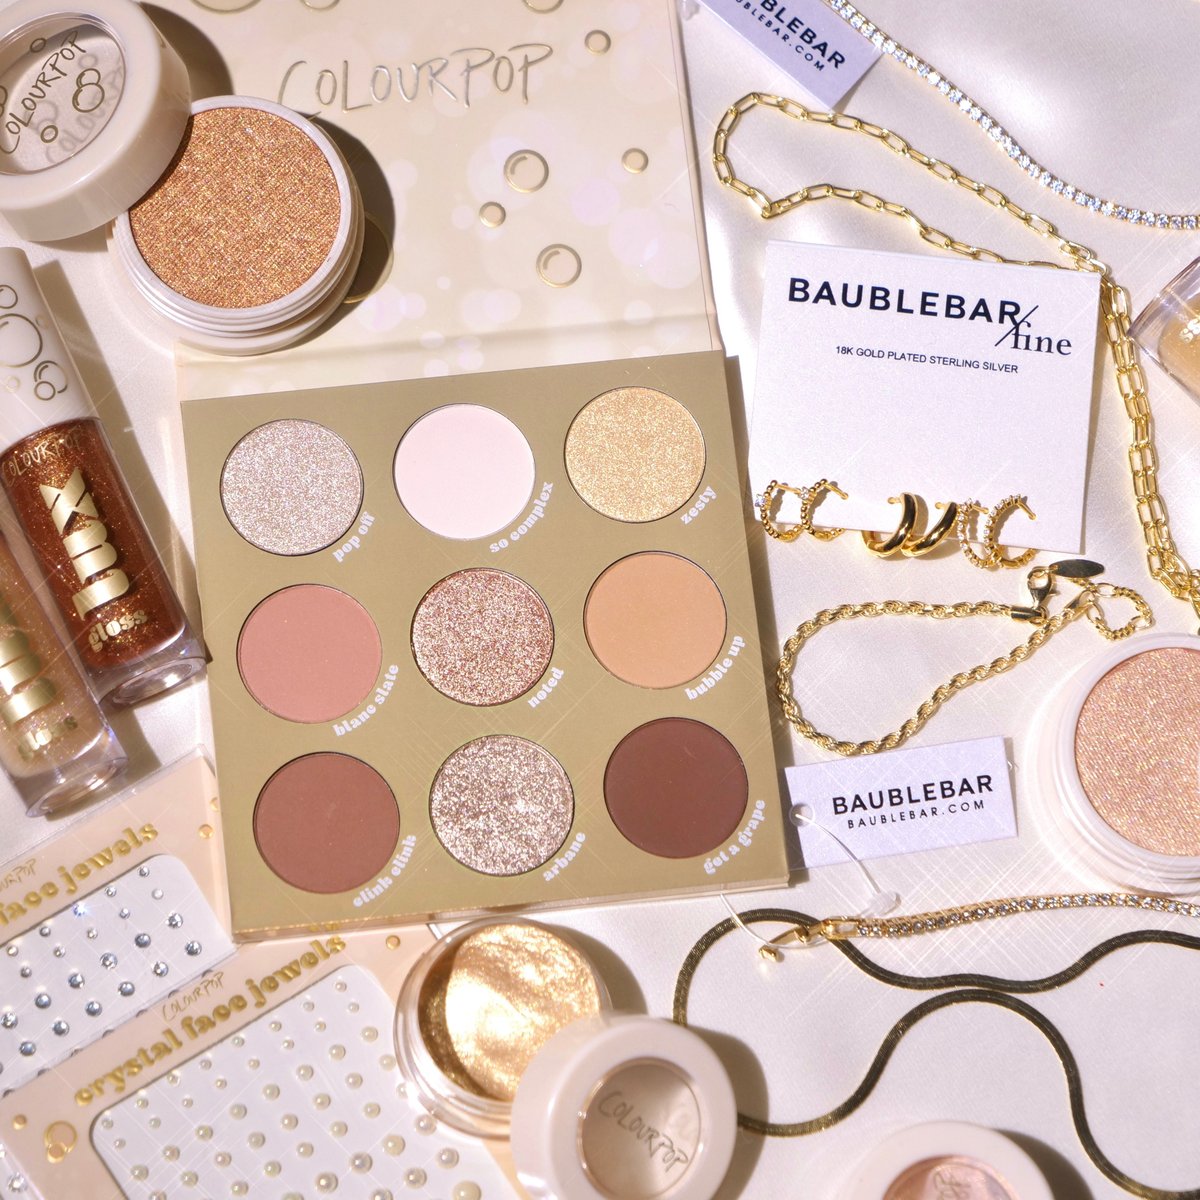 #SURPRISEGIVEAWAY We're getting ready for New Year's with @BaubleBar! 2 lucky winners will receive the Feelin' Bubbly Collection + $100 e-gift card to baublebar.com 💛🌟 

HOW TO ENTER👇
✨ Follow @ColourPopCo + @BaubleBar  
✨ Like & RT
✨ BONUS: Reply w/ 🍾POP OFF🍾